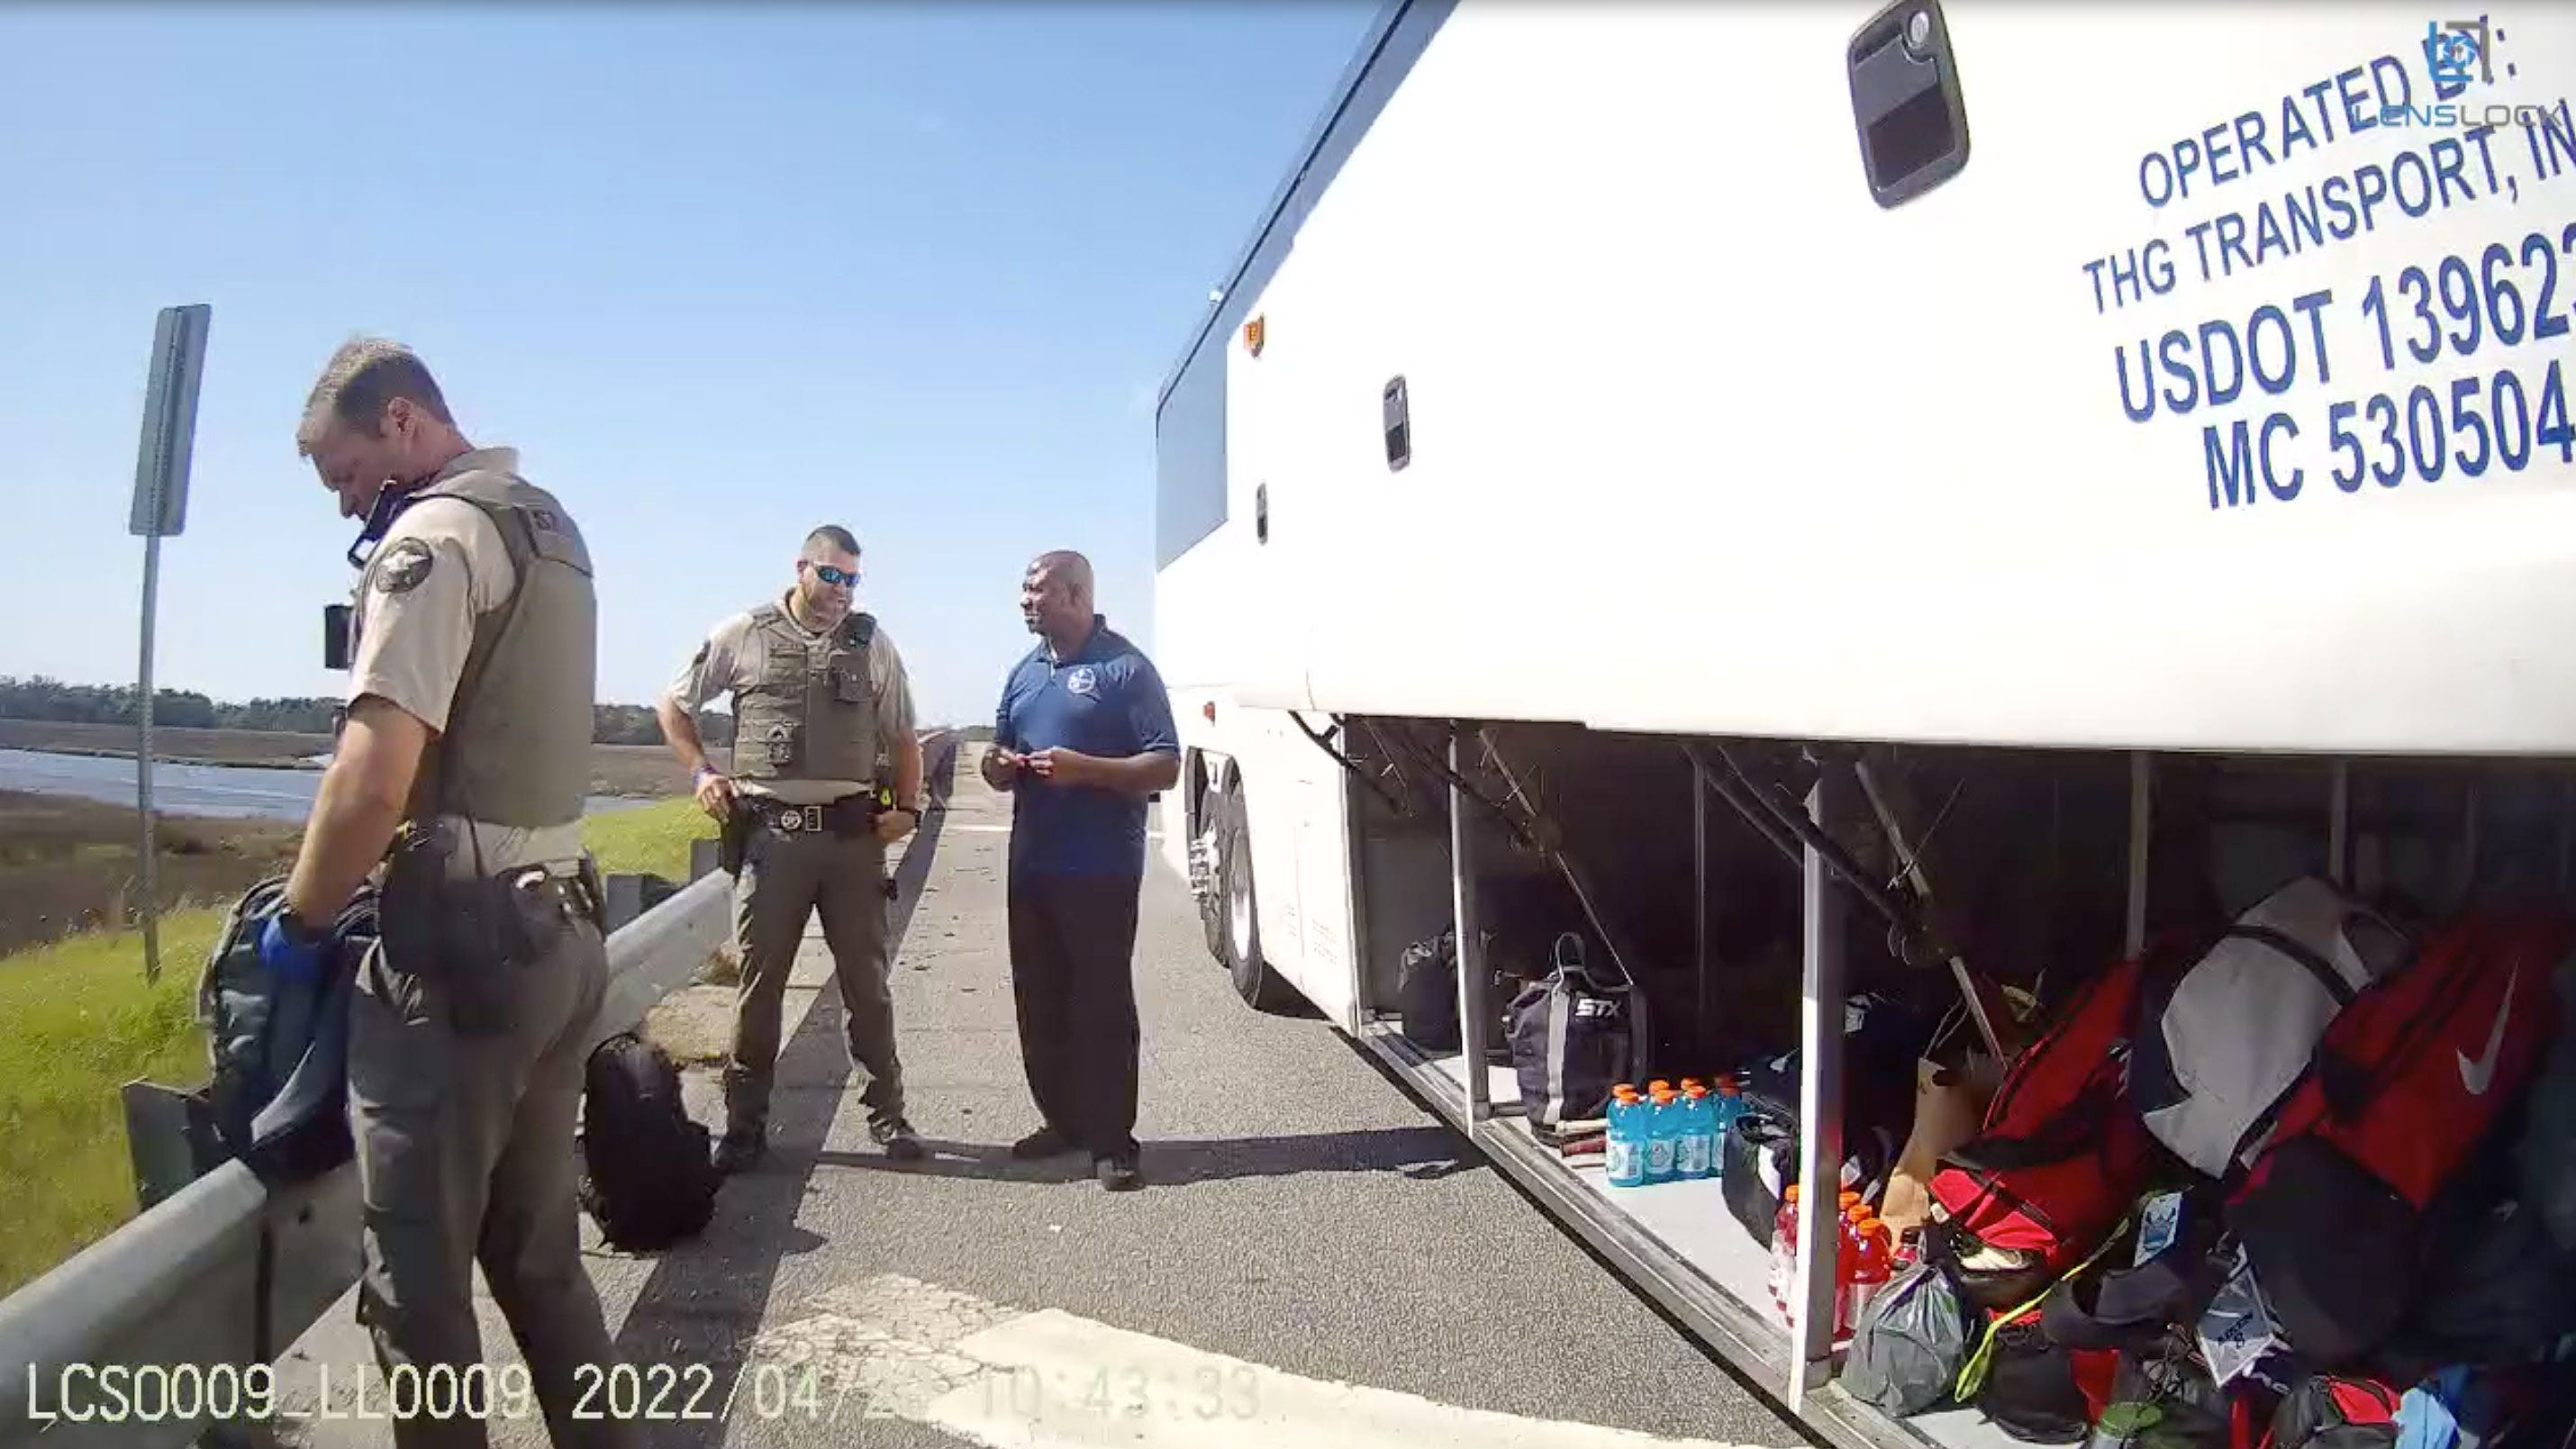 Body camera footage shows Liberty County deputies beginning their search of luggage belonging to the Delaware State University women's lacrosse team during a traffic stop on April 20, 2022, in Georgia.  The team's bus driver (middle) talks to one of the officers.